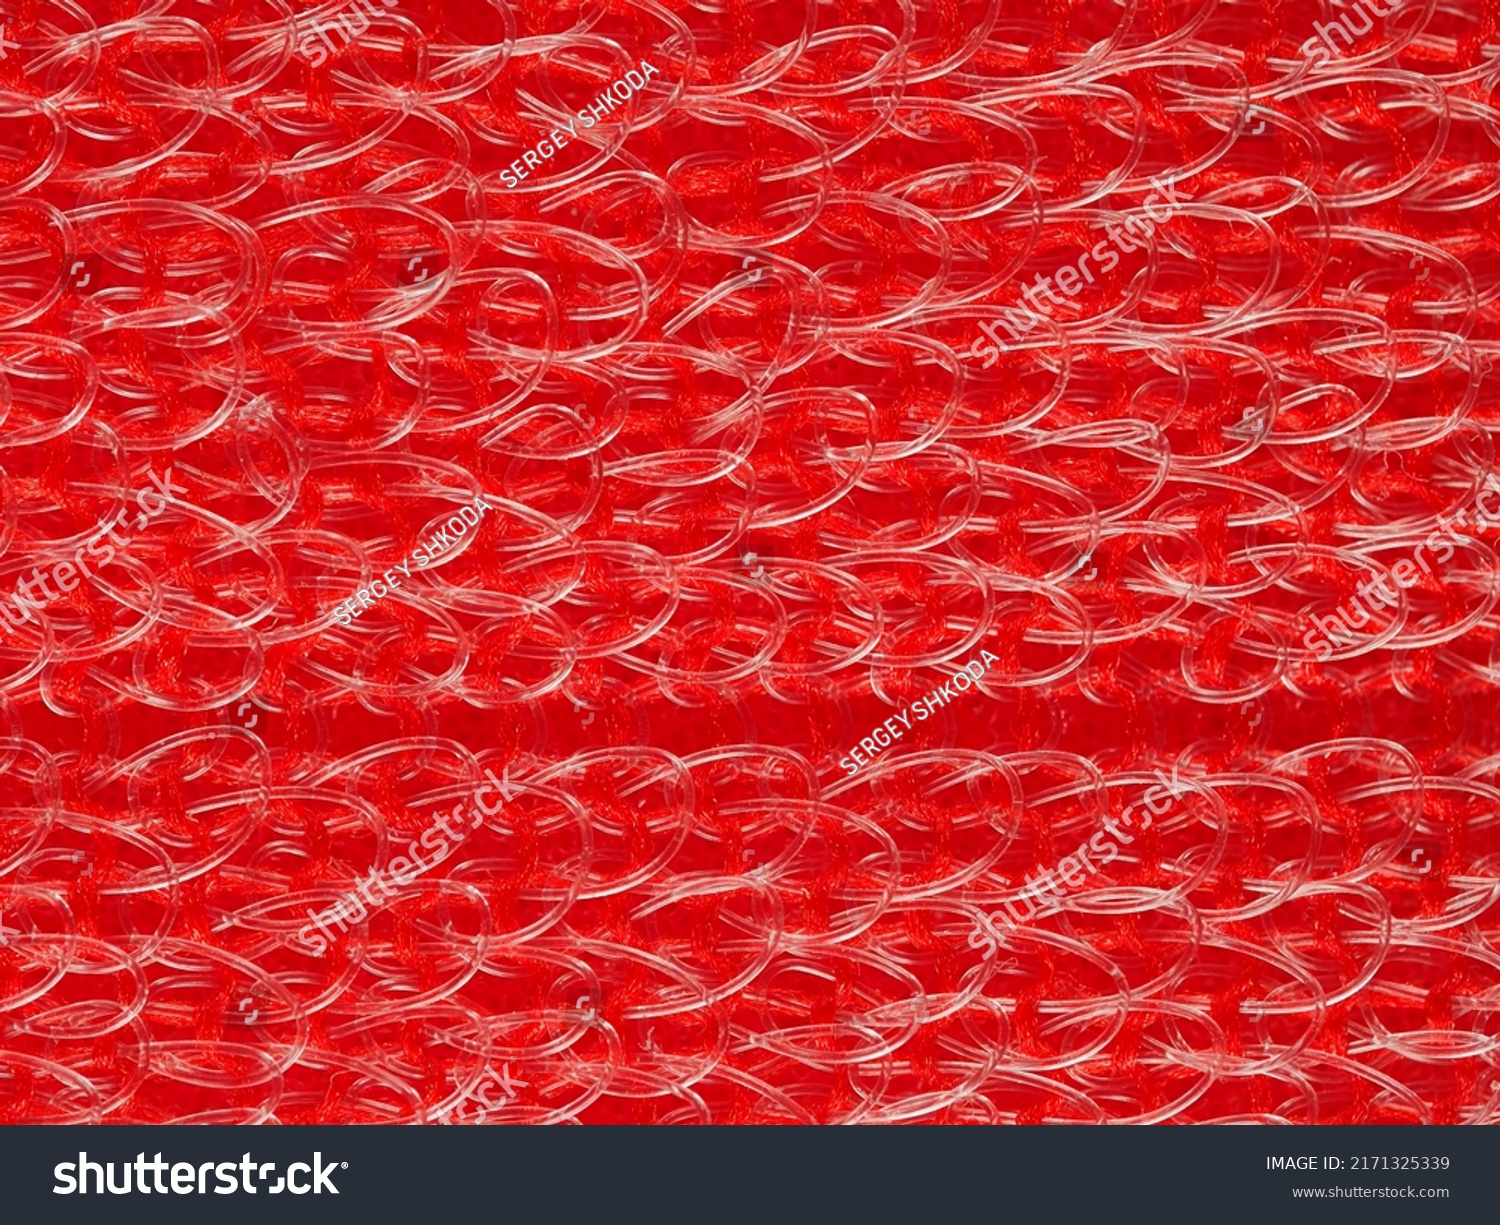 close up, background, texture, large horizontal banner. heterogeneous surface structure bright saturated red sponge for washing dishes, kitchen, bath. full depth of field. high resolution photo #2171325339